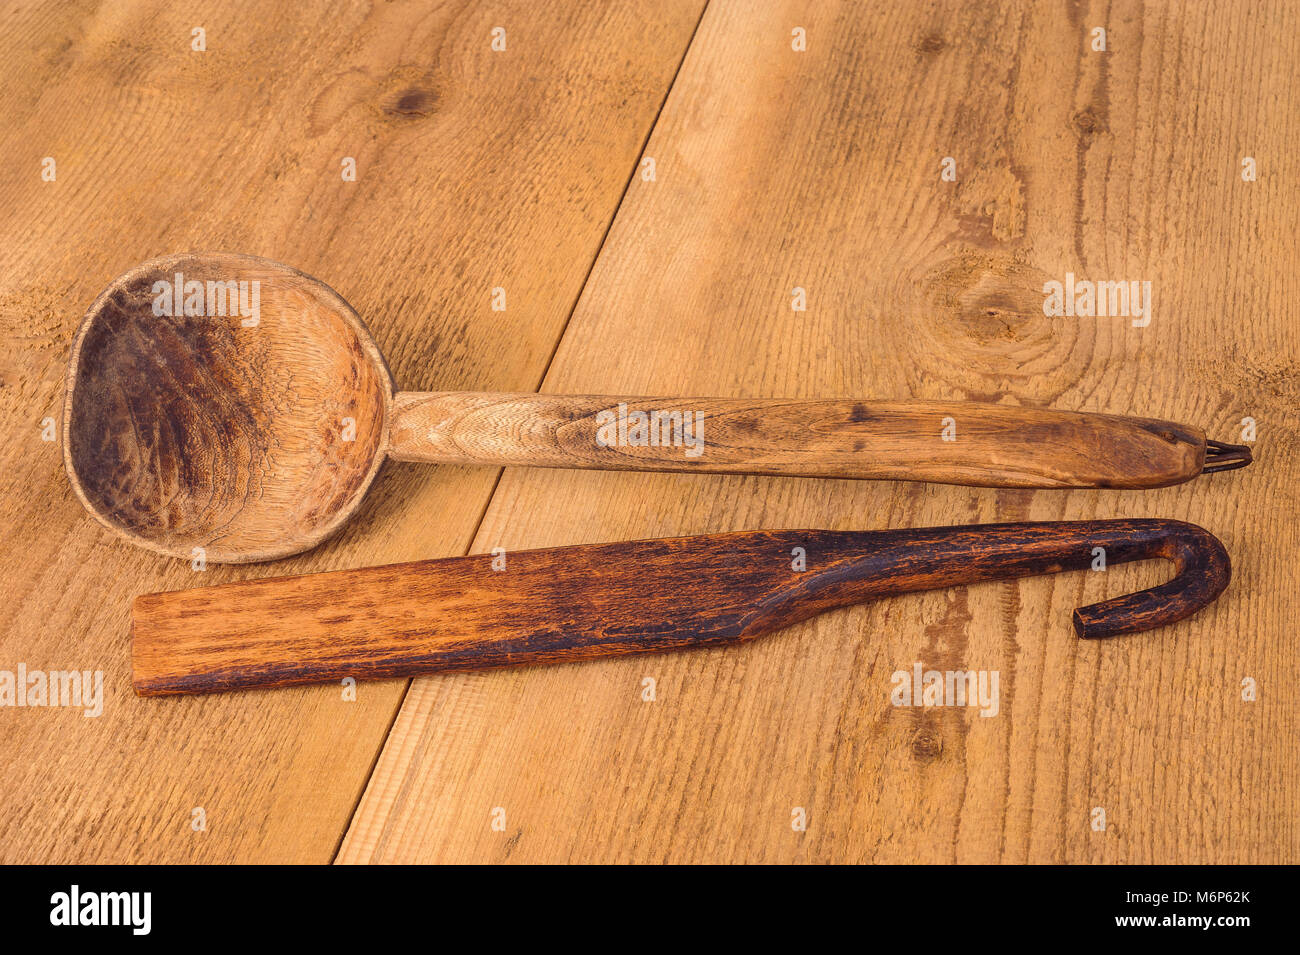 Old kitchen utensils on a wooden table Stock Photo